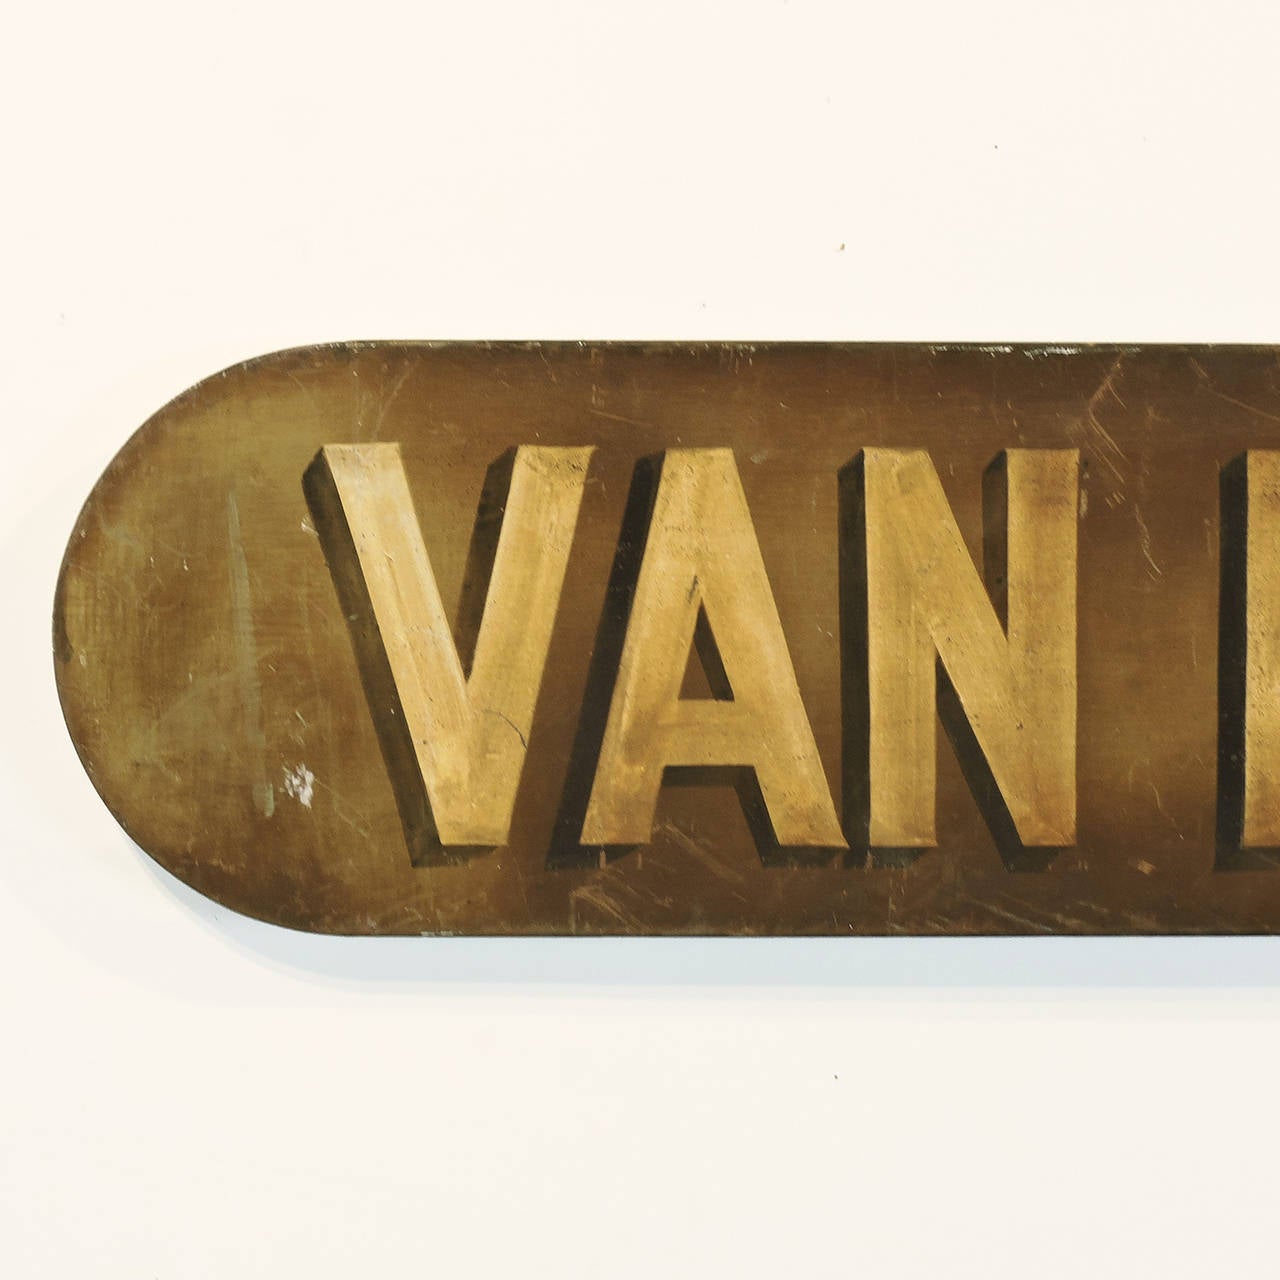 An early 20th century painted metal advertising sign for Van Heusen shirts. Measures: Length 59 1/4 inches.

The history of the American Van Heusen company began in 1881 in the Appalachian coal country of Pennsylvania, where Moses Phillips and his